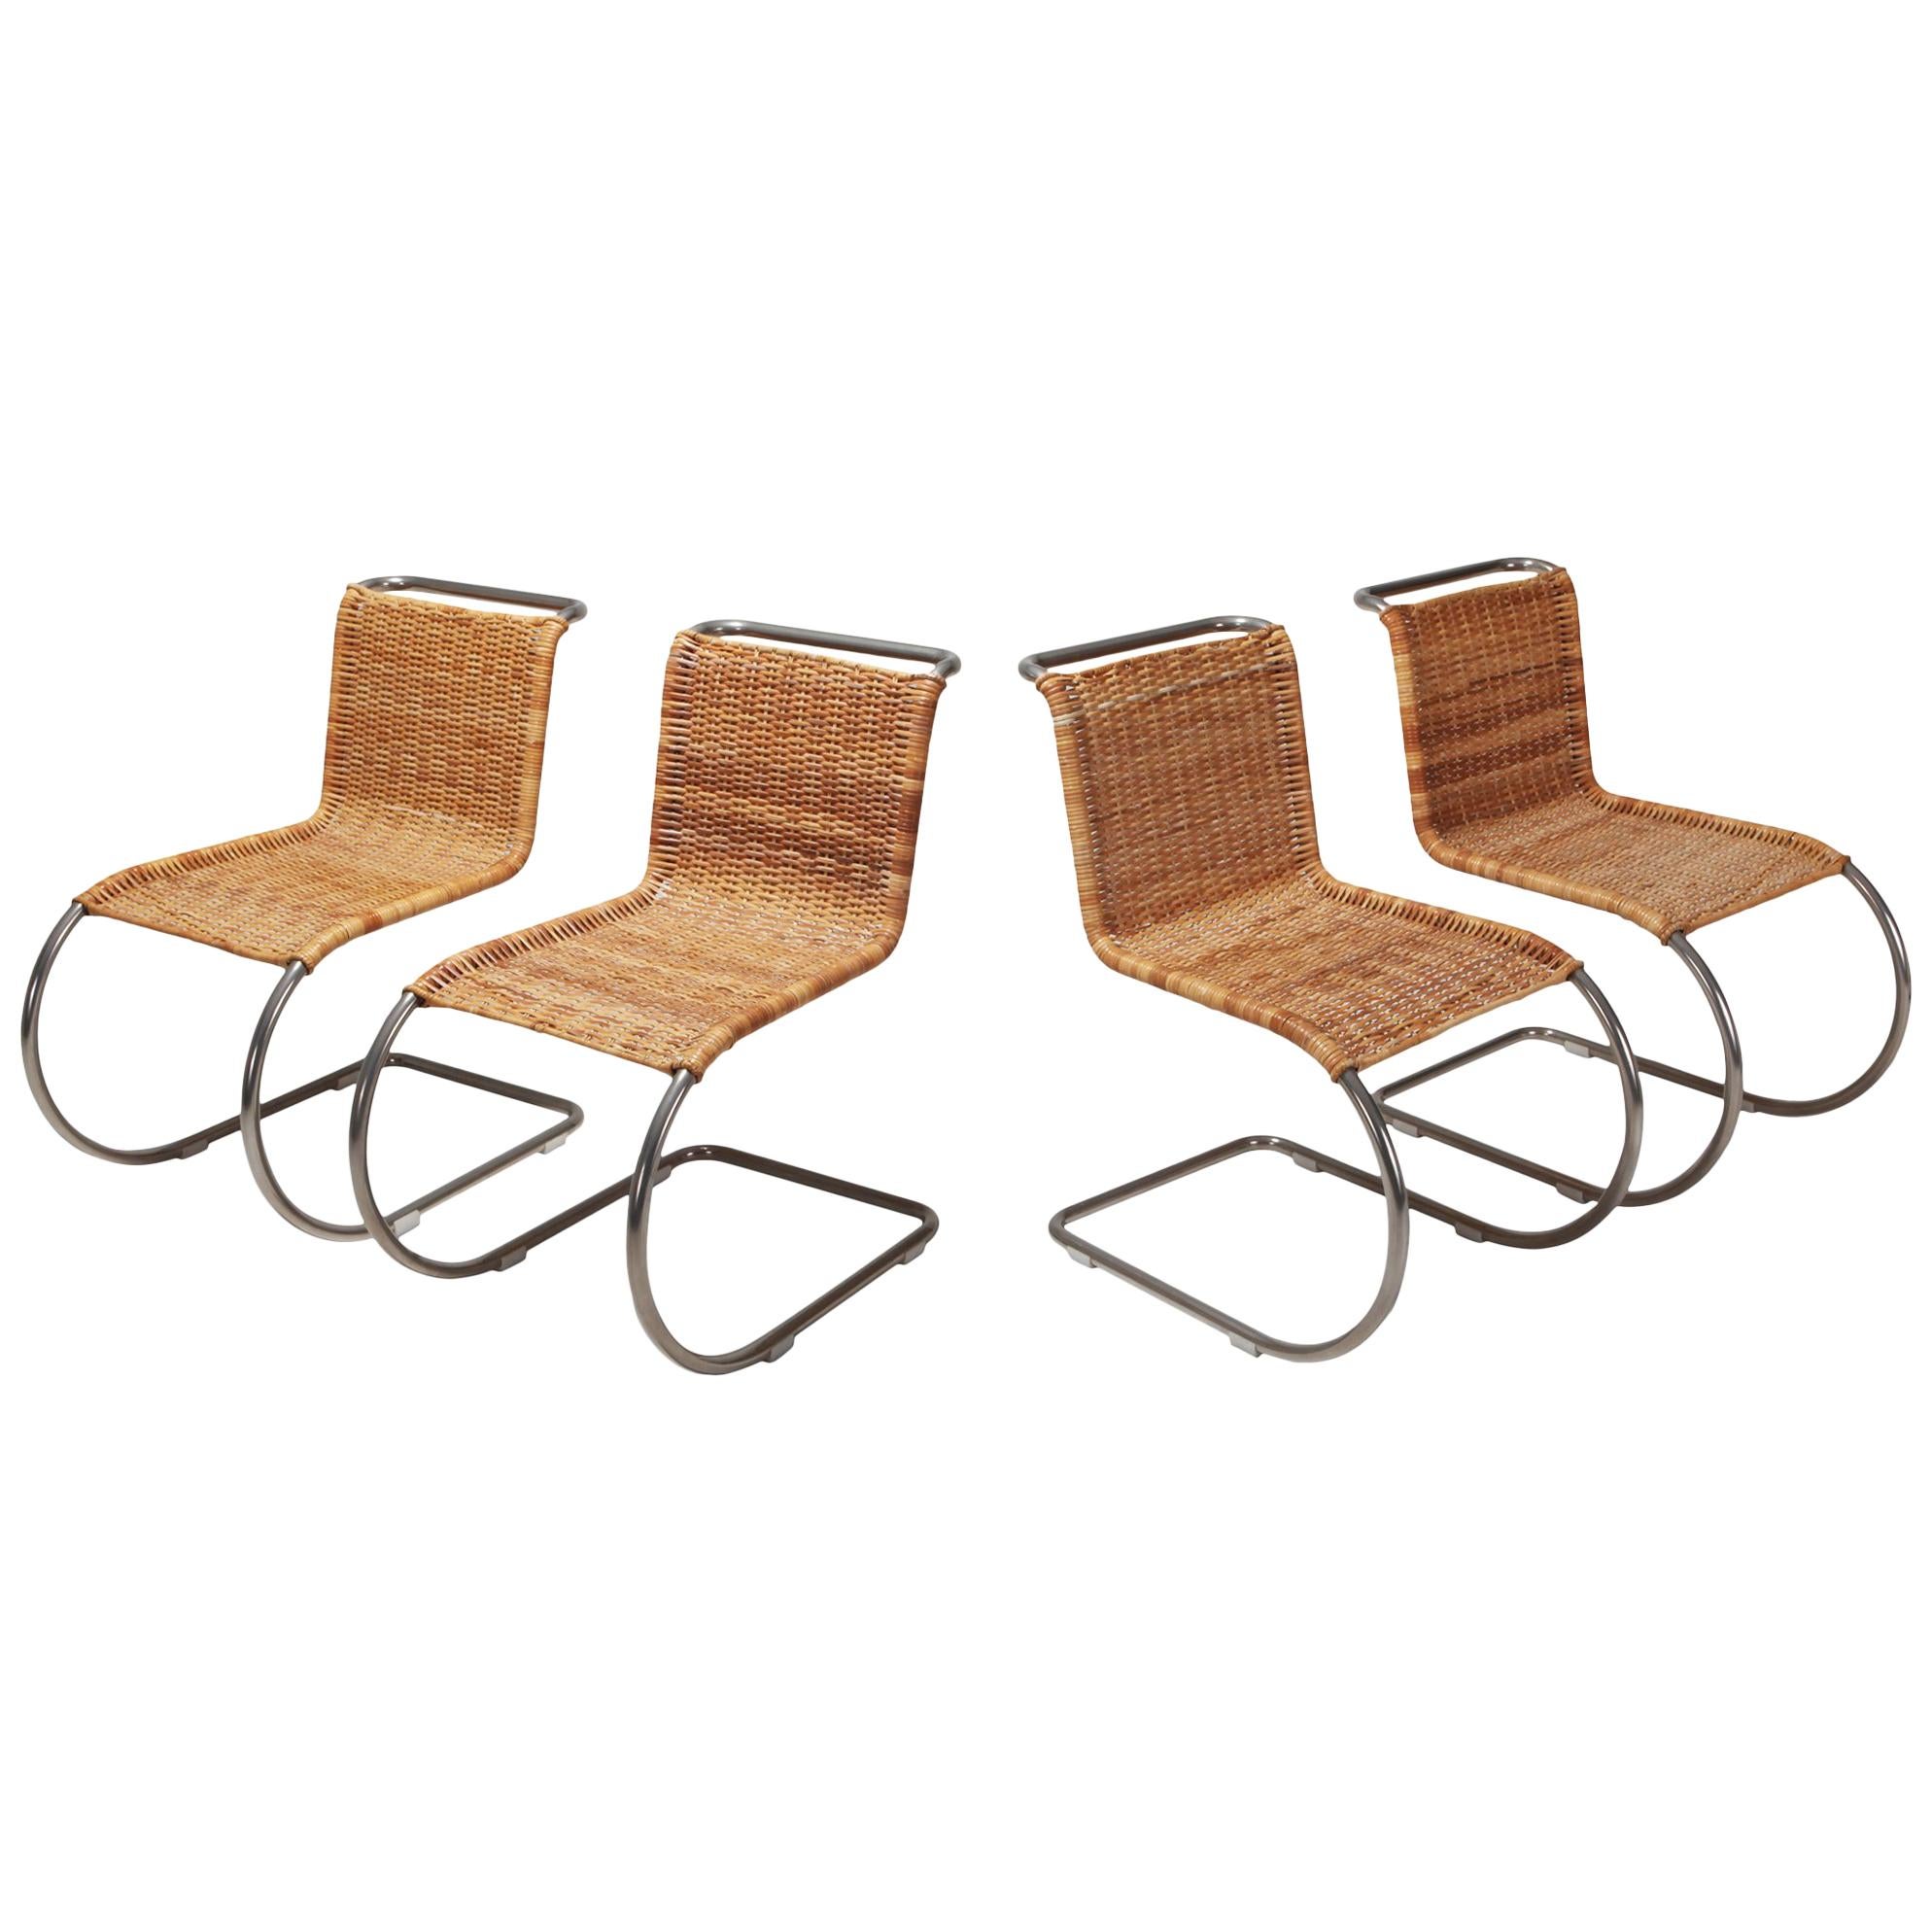 Ludwig Mies van der Rohe Set of Four B42 Weissenhof Chairs by Tecta